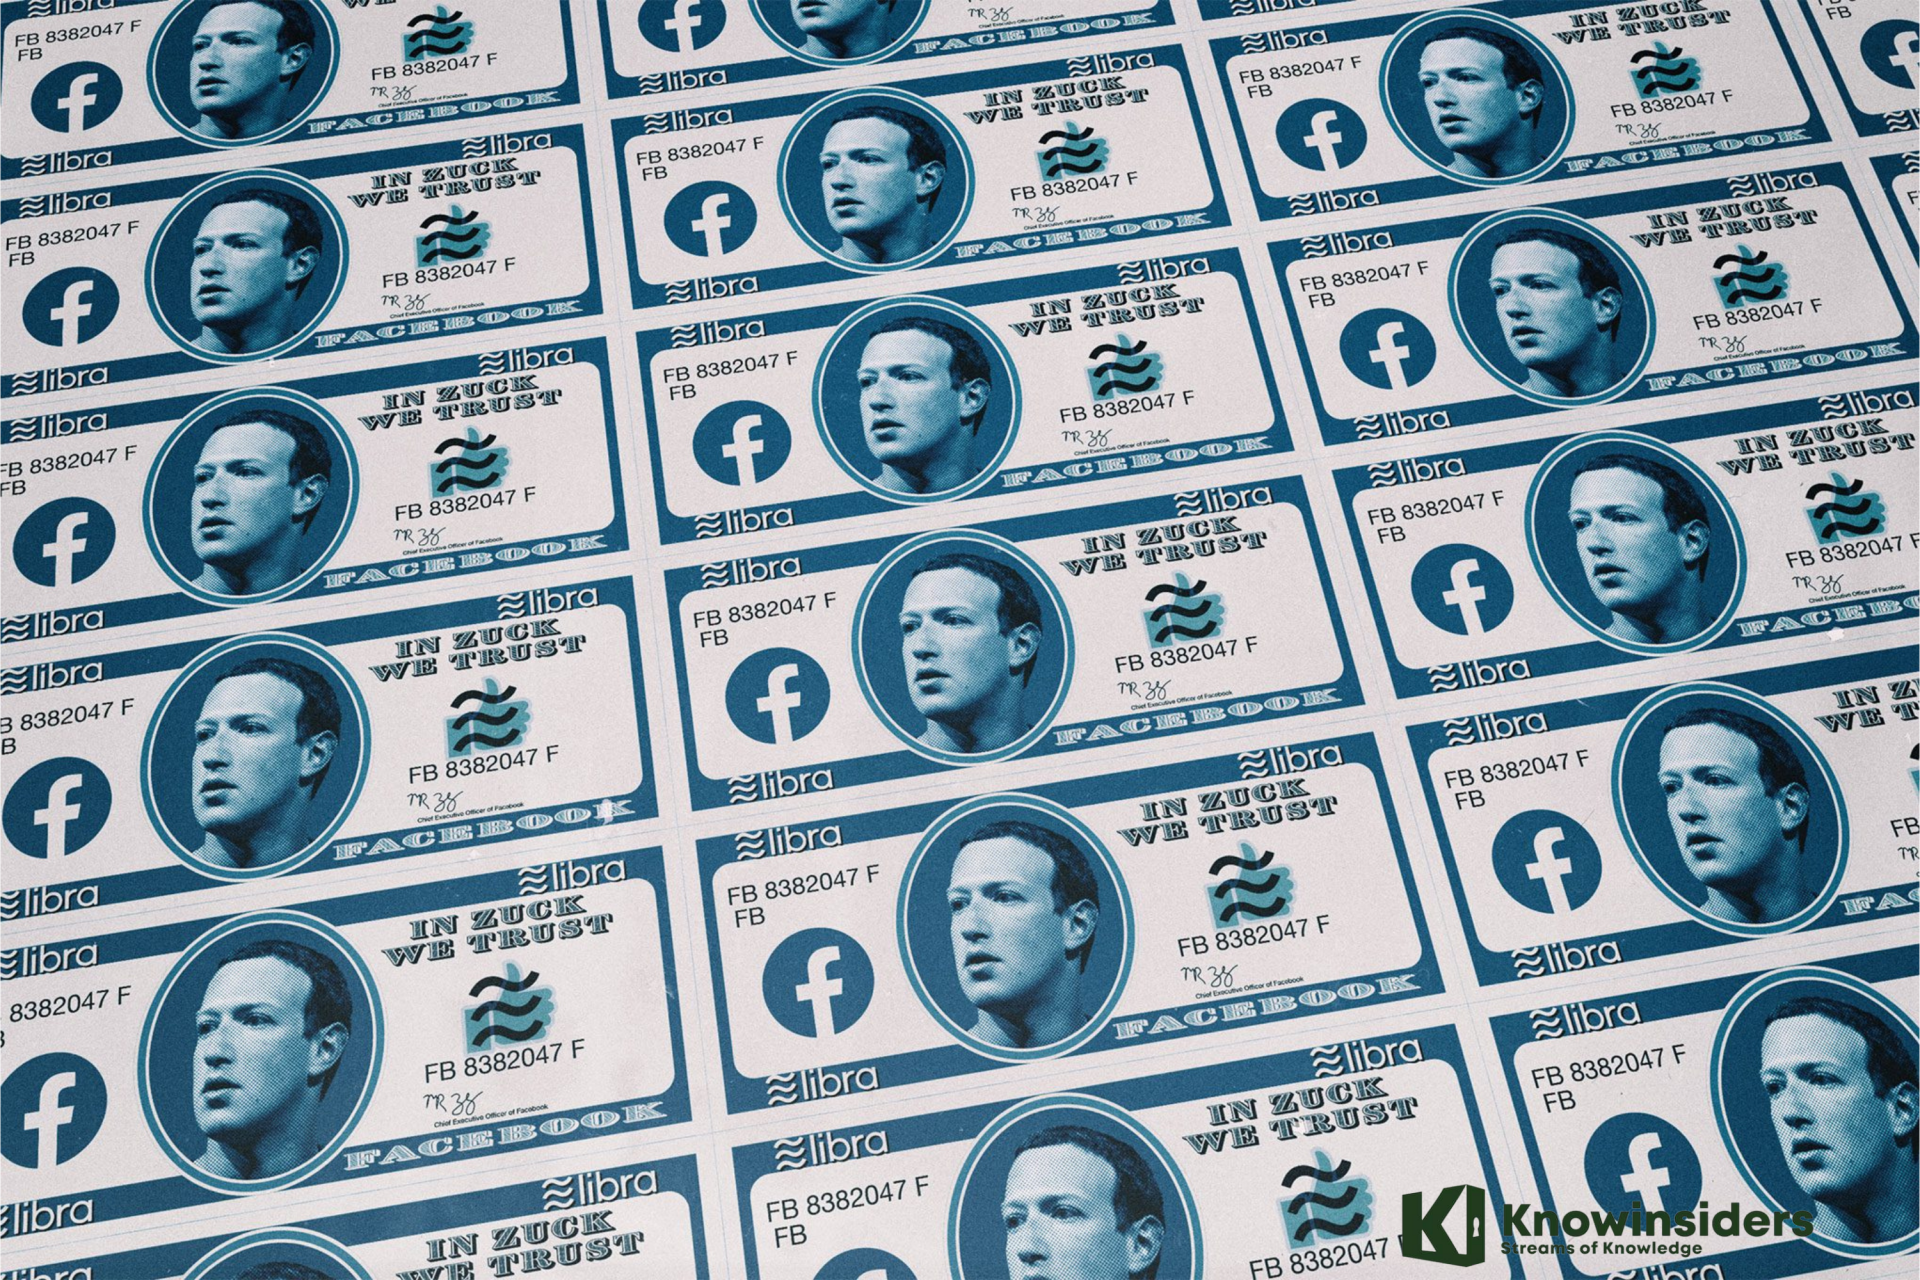 Facebook's cryptocurrency